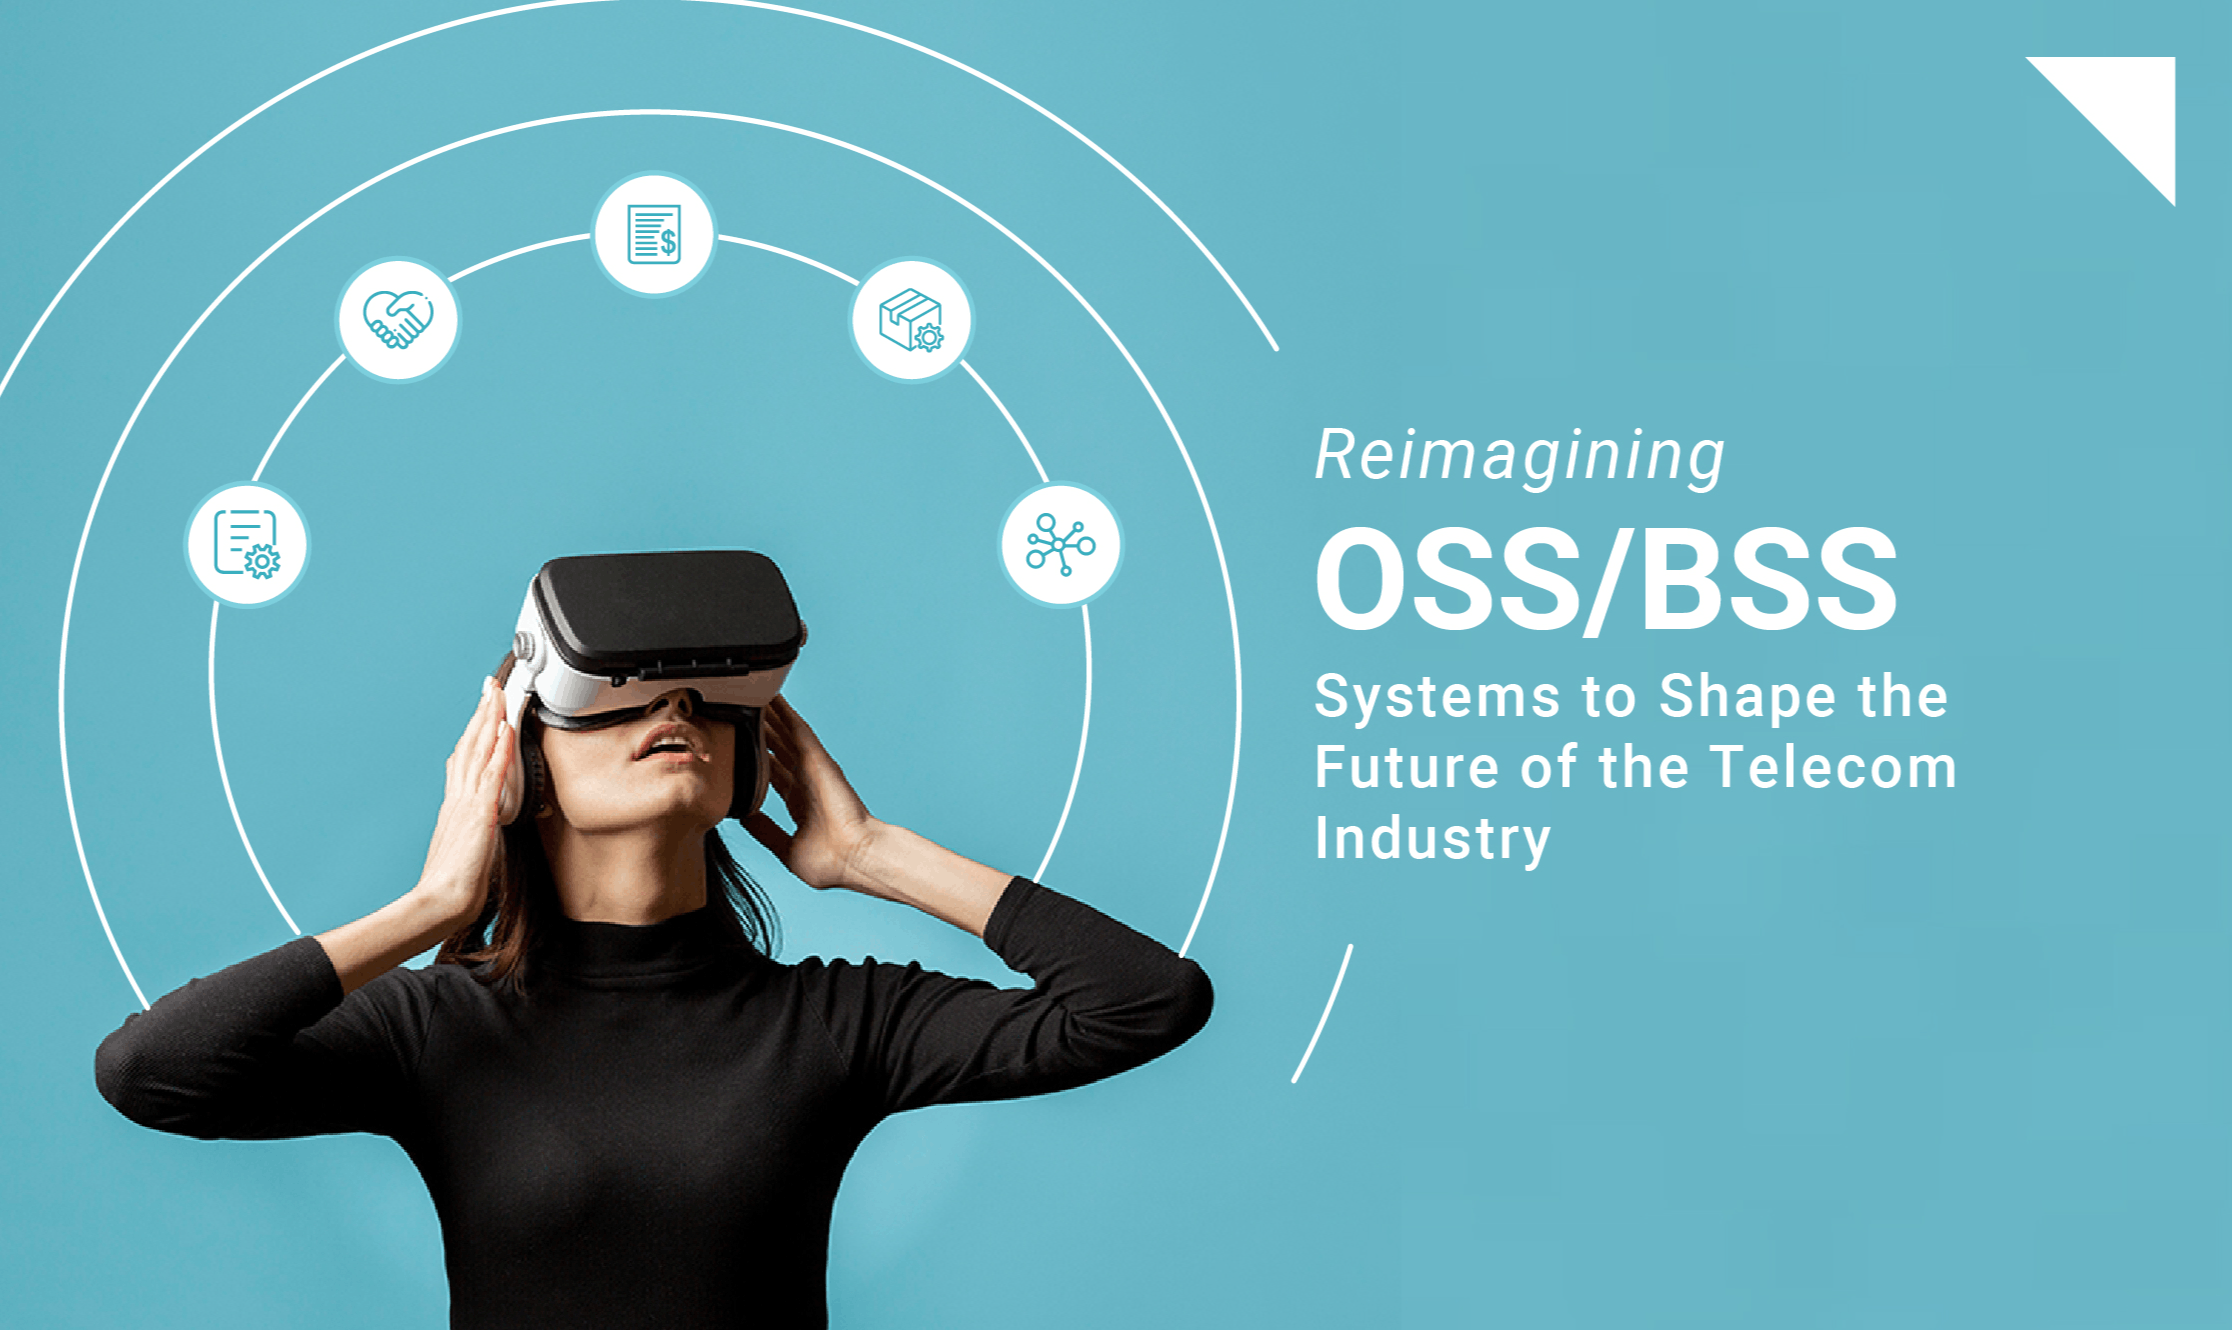 featured image - Reimagining OSS BSS Systems to Shape the Future of the Telecom Industry